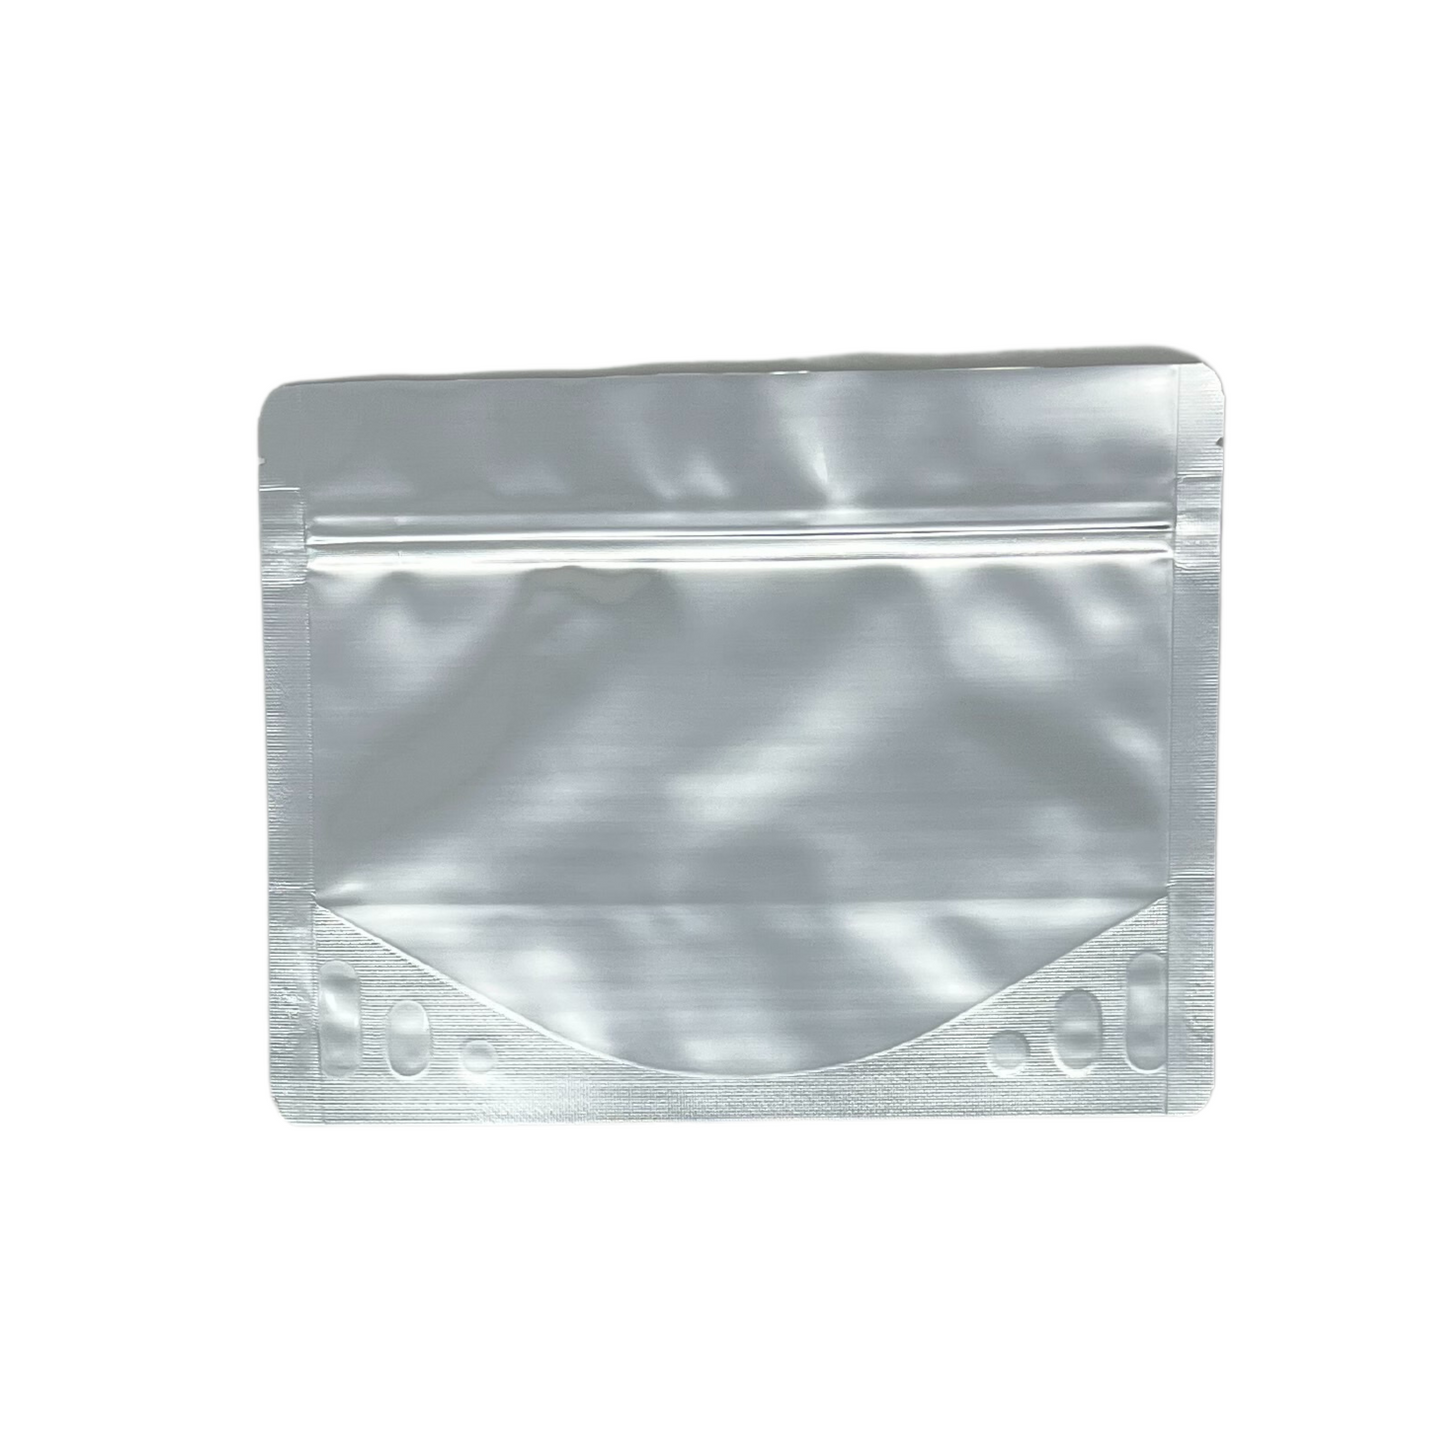 MYLAR - Single Portion Food Pouch (8.5 X 6.5 x 3 inches)